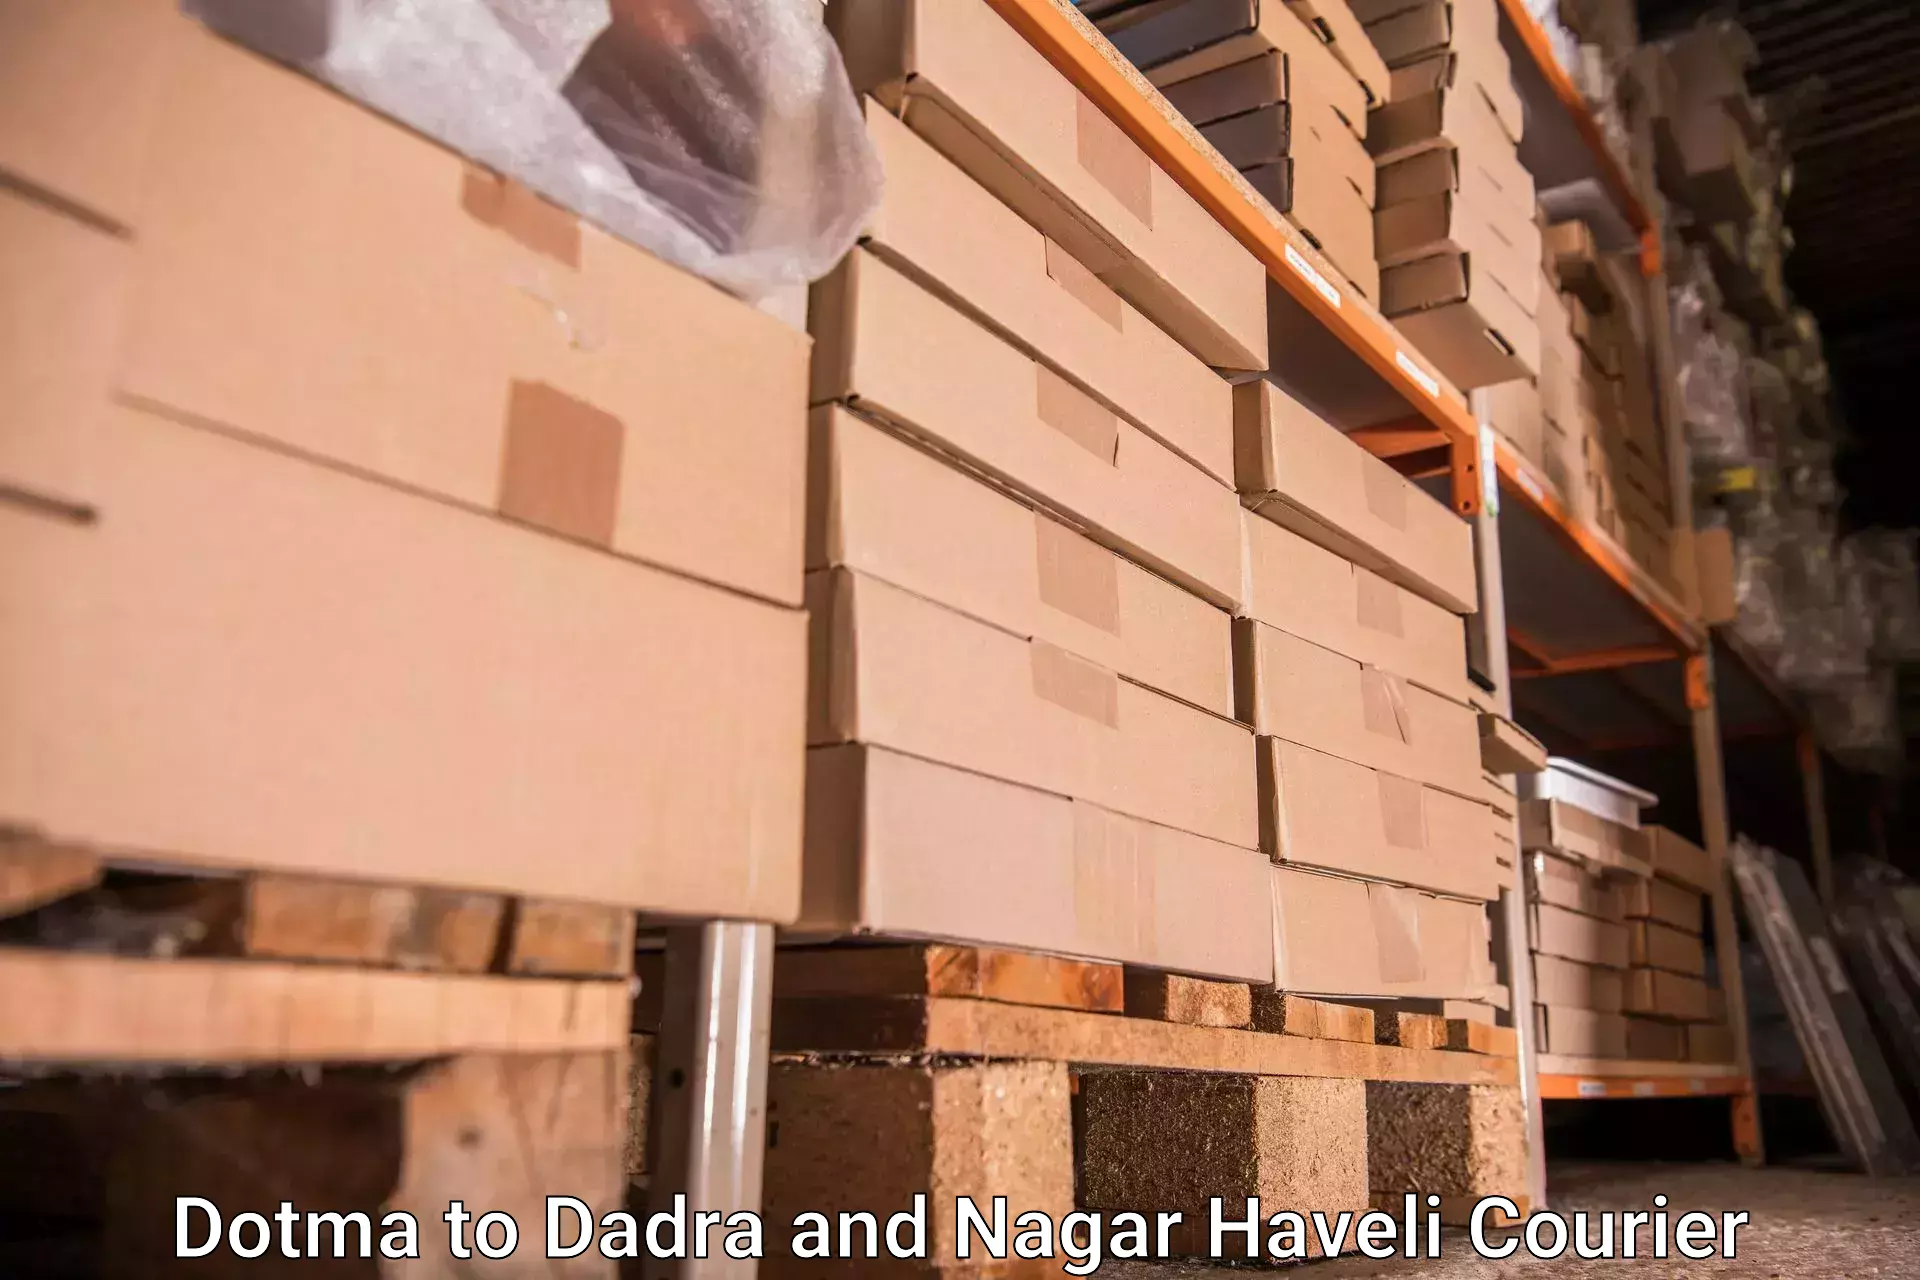 Excess baggage transport in Dotma to Dadra and Nagar Haveli